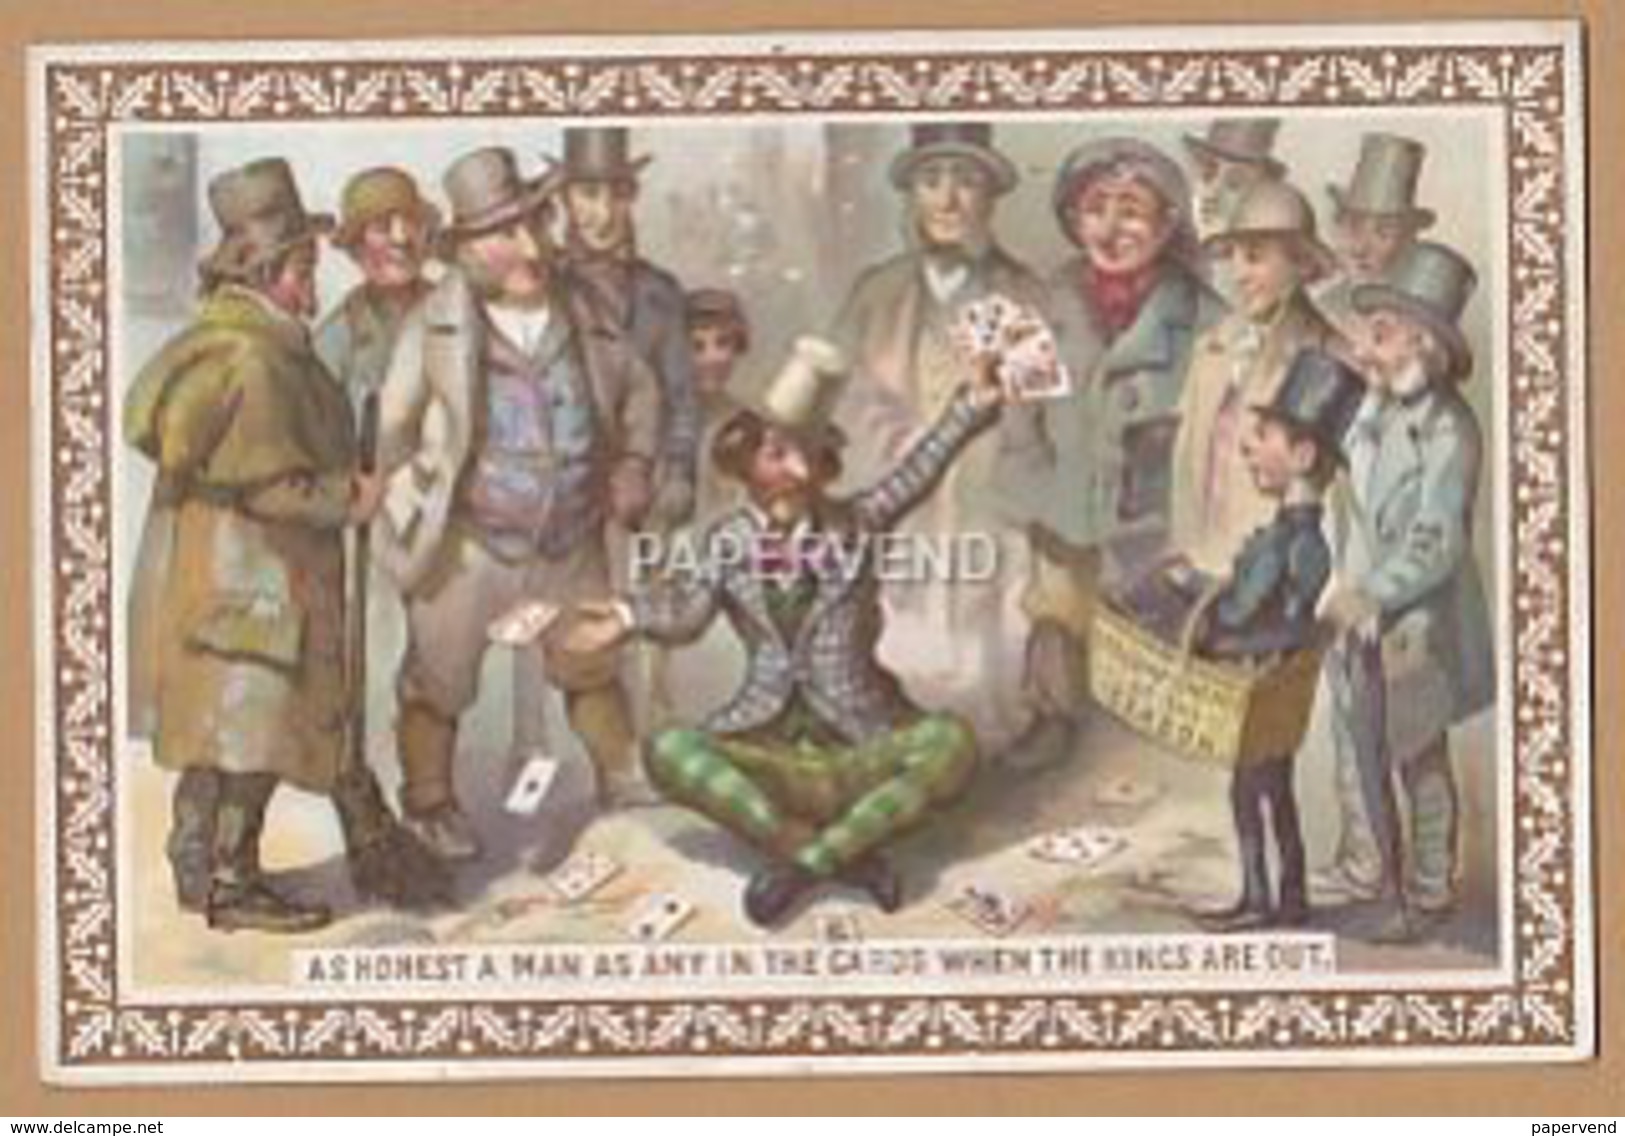 Victorian  Card De La Rue Proverbs An Honest Man As Any In The Cards Egc38 - Unclassified